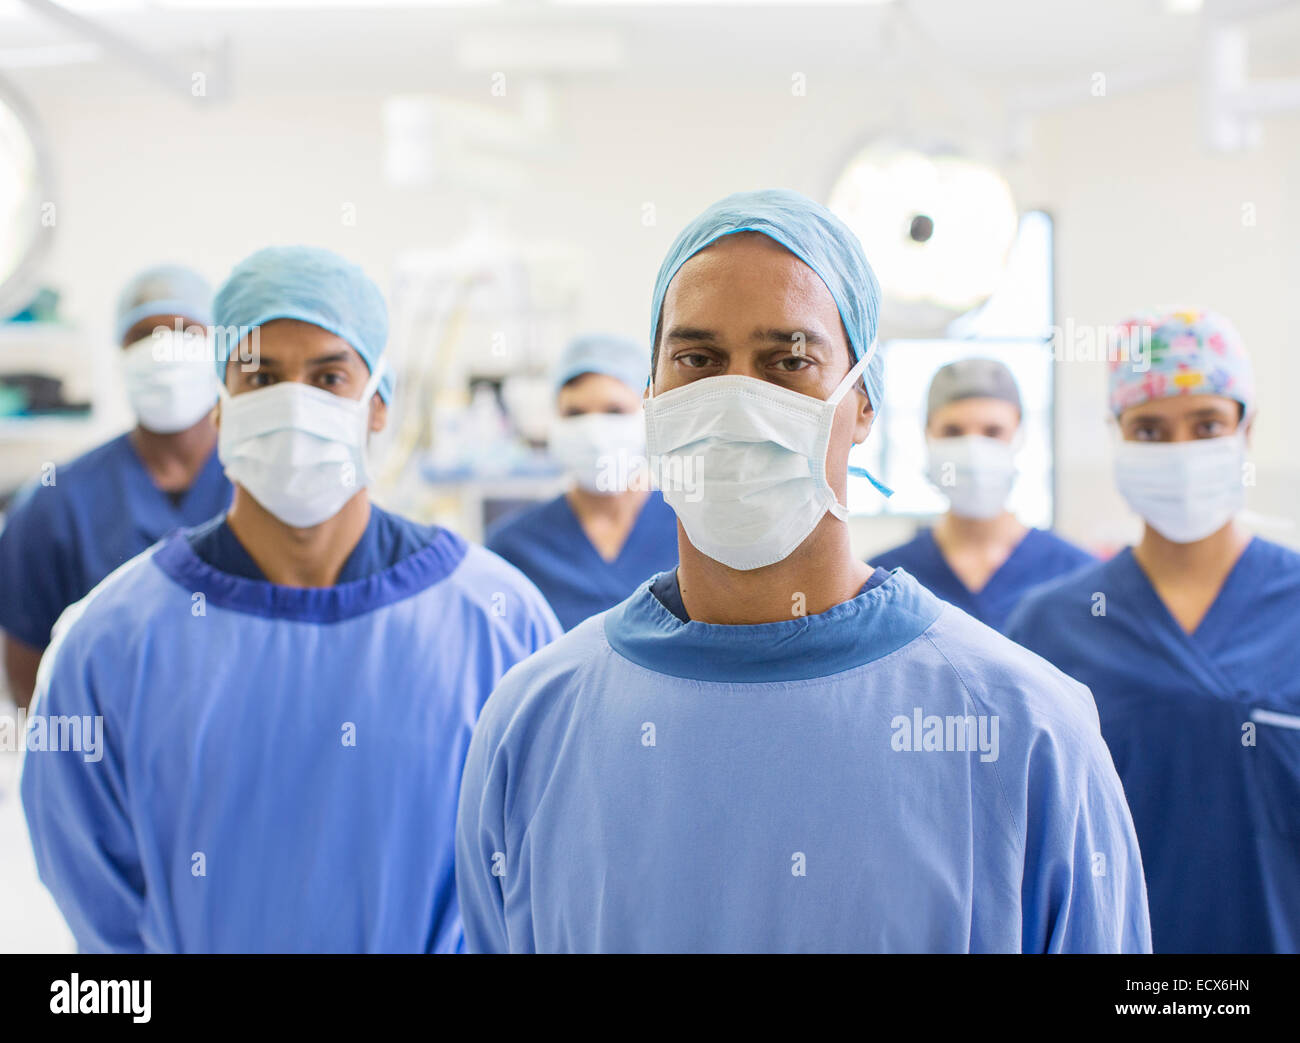 Group portrait of team of masked surgeons in hospital Stock Photo